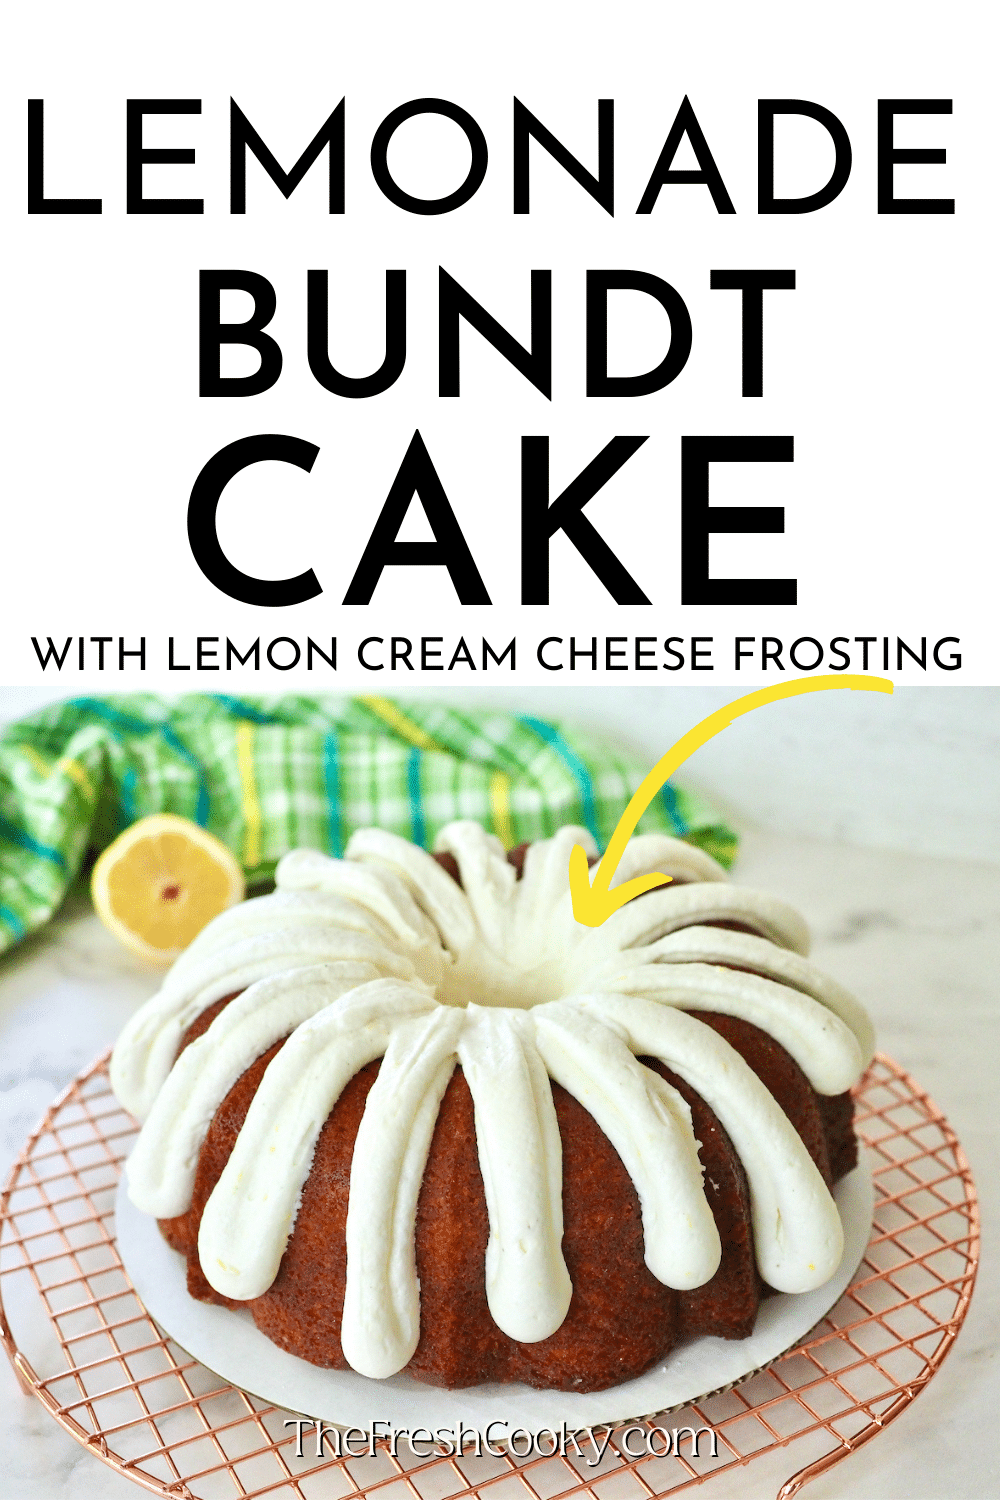 Lemonade Bundt Cake pin with image of bundt cake with thick fingers of cream cheese frosting on plate with lemons behind.